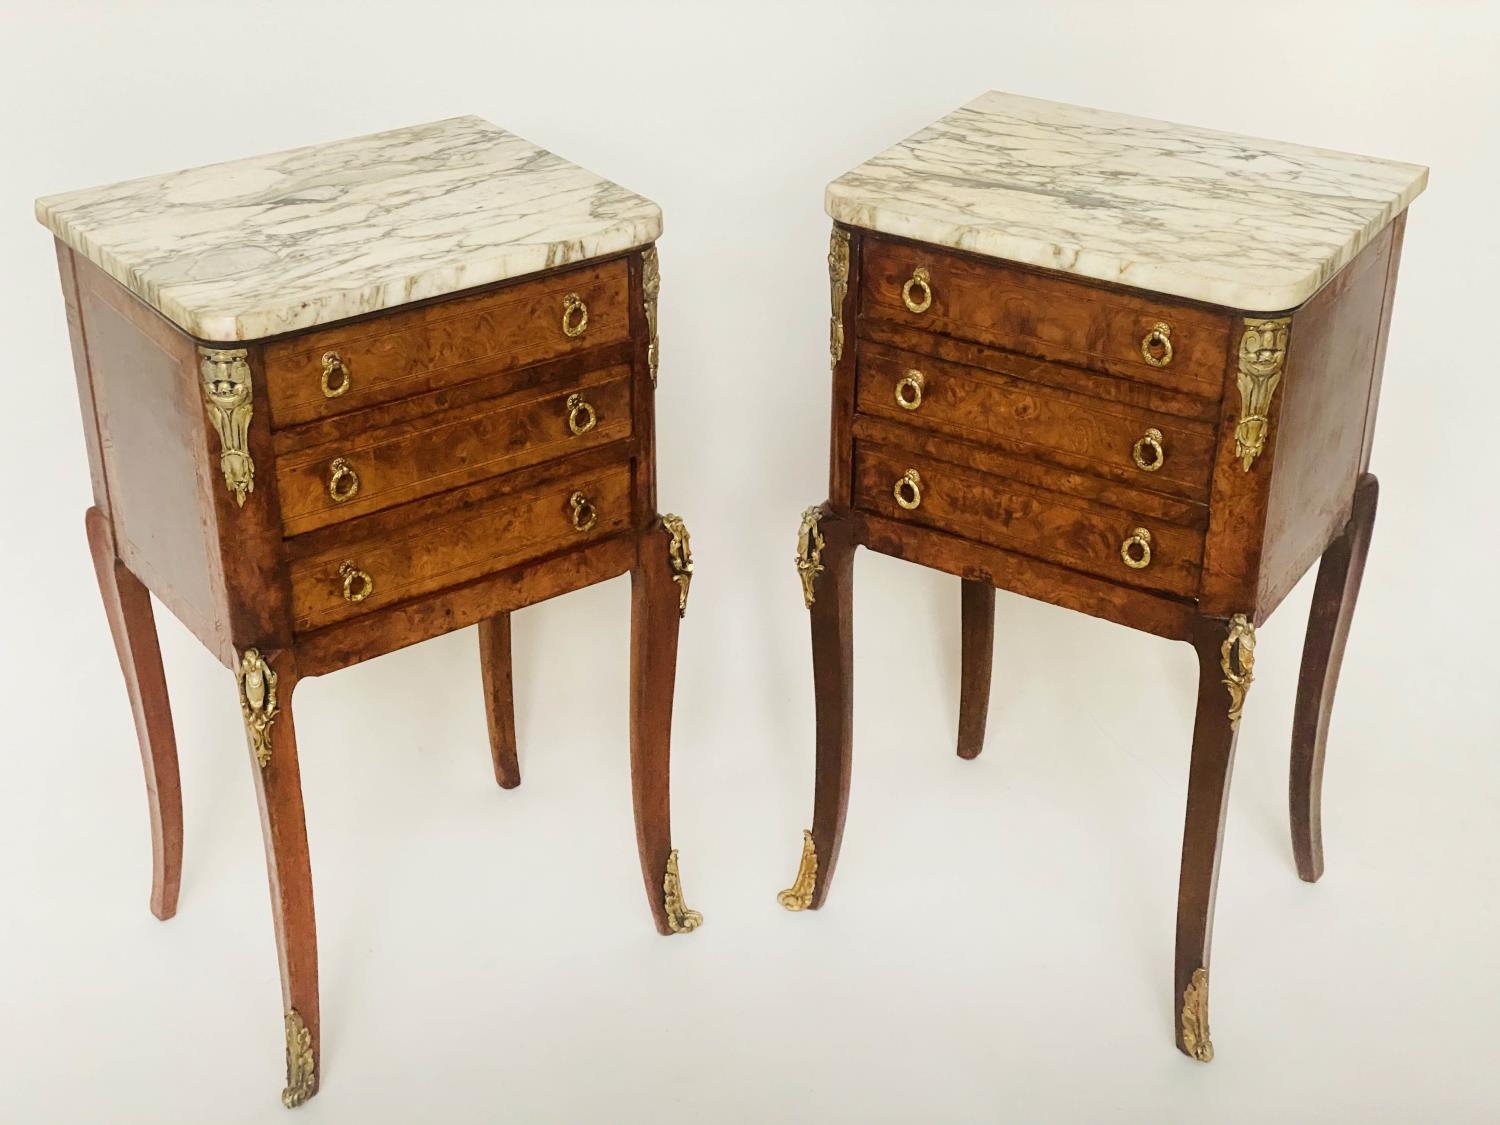 TABLES DE NUIT, a pair, early 20th century French Louis XVI style burr walnut, crossbanded and